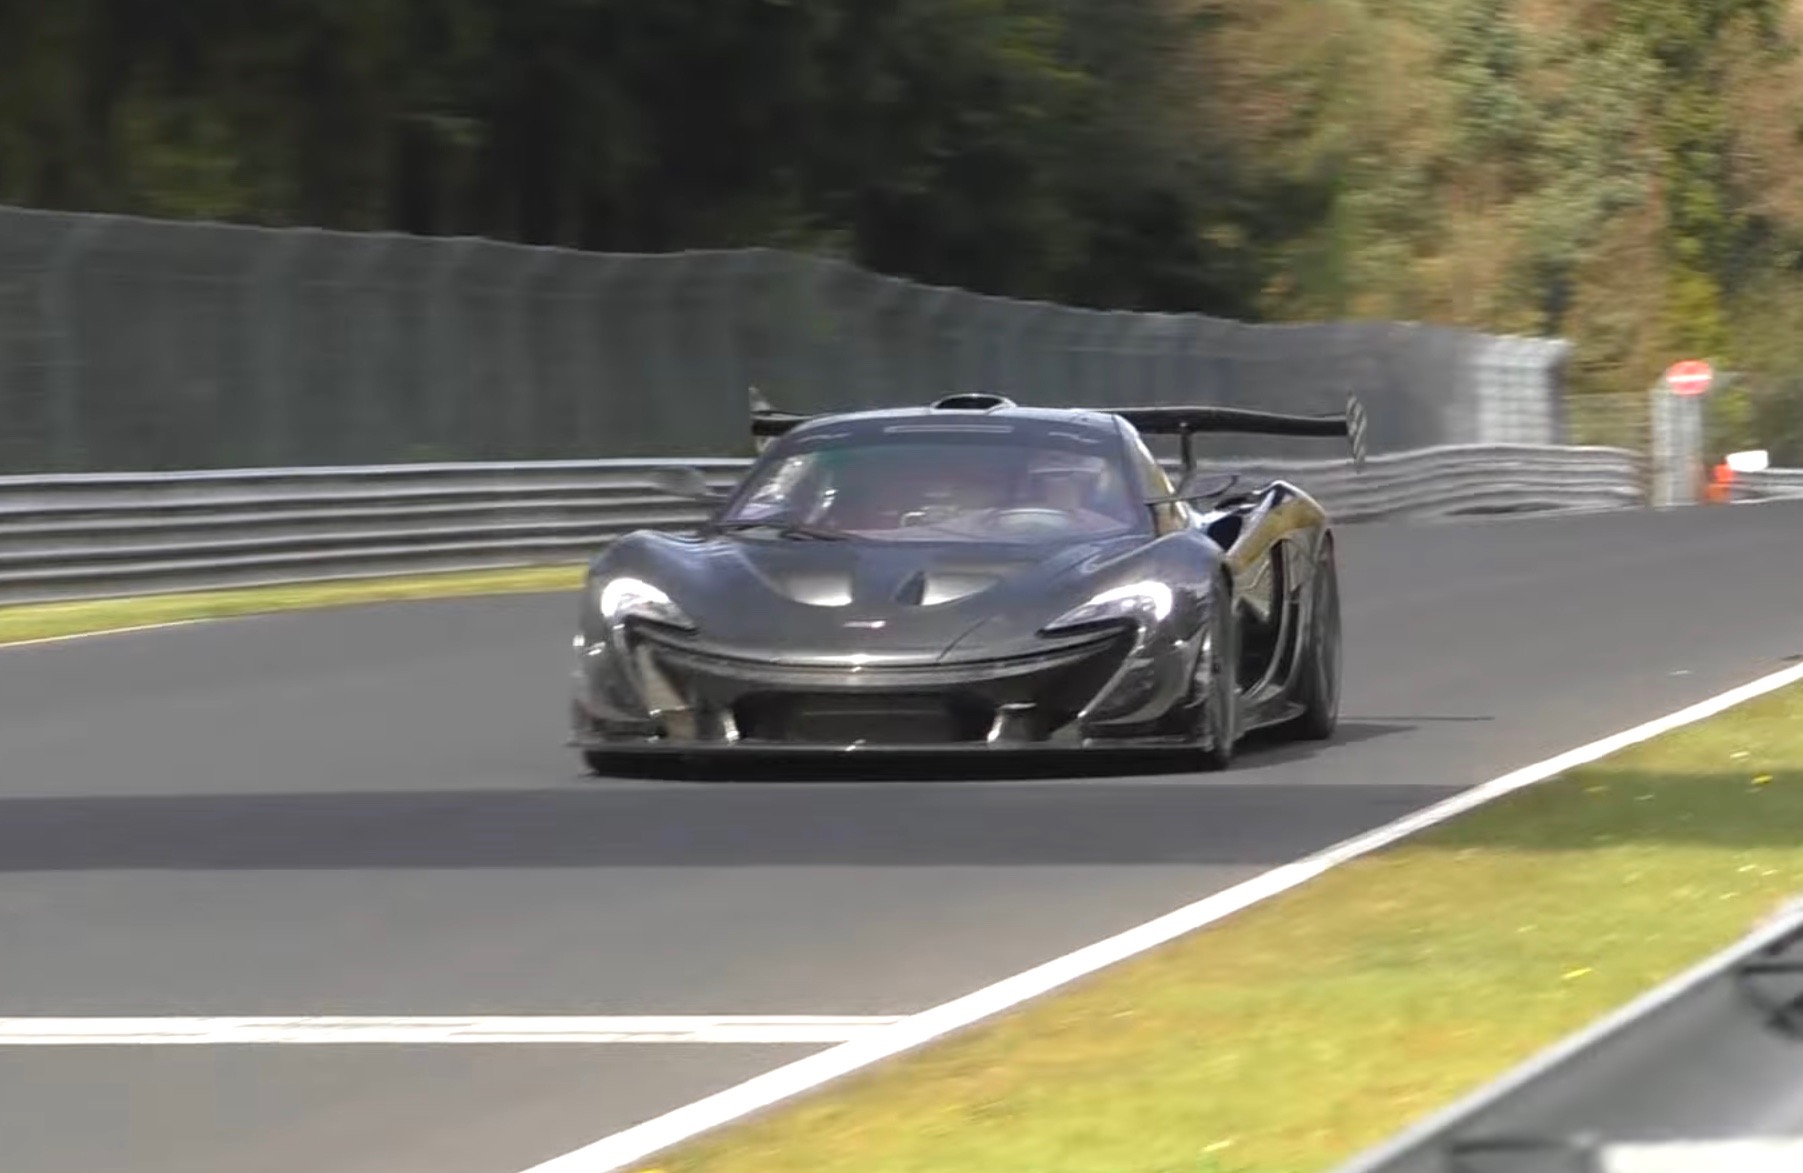 McLaren P1 LM going for the Nurburgring lap record? (video)